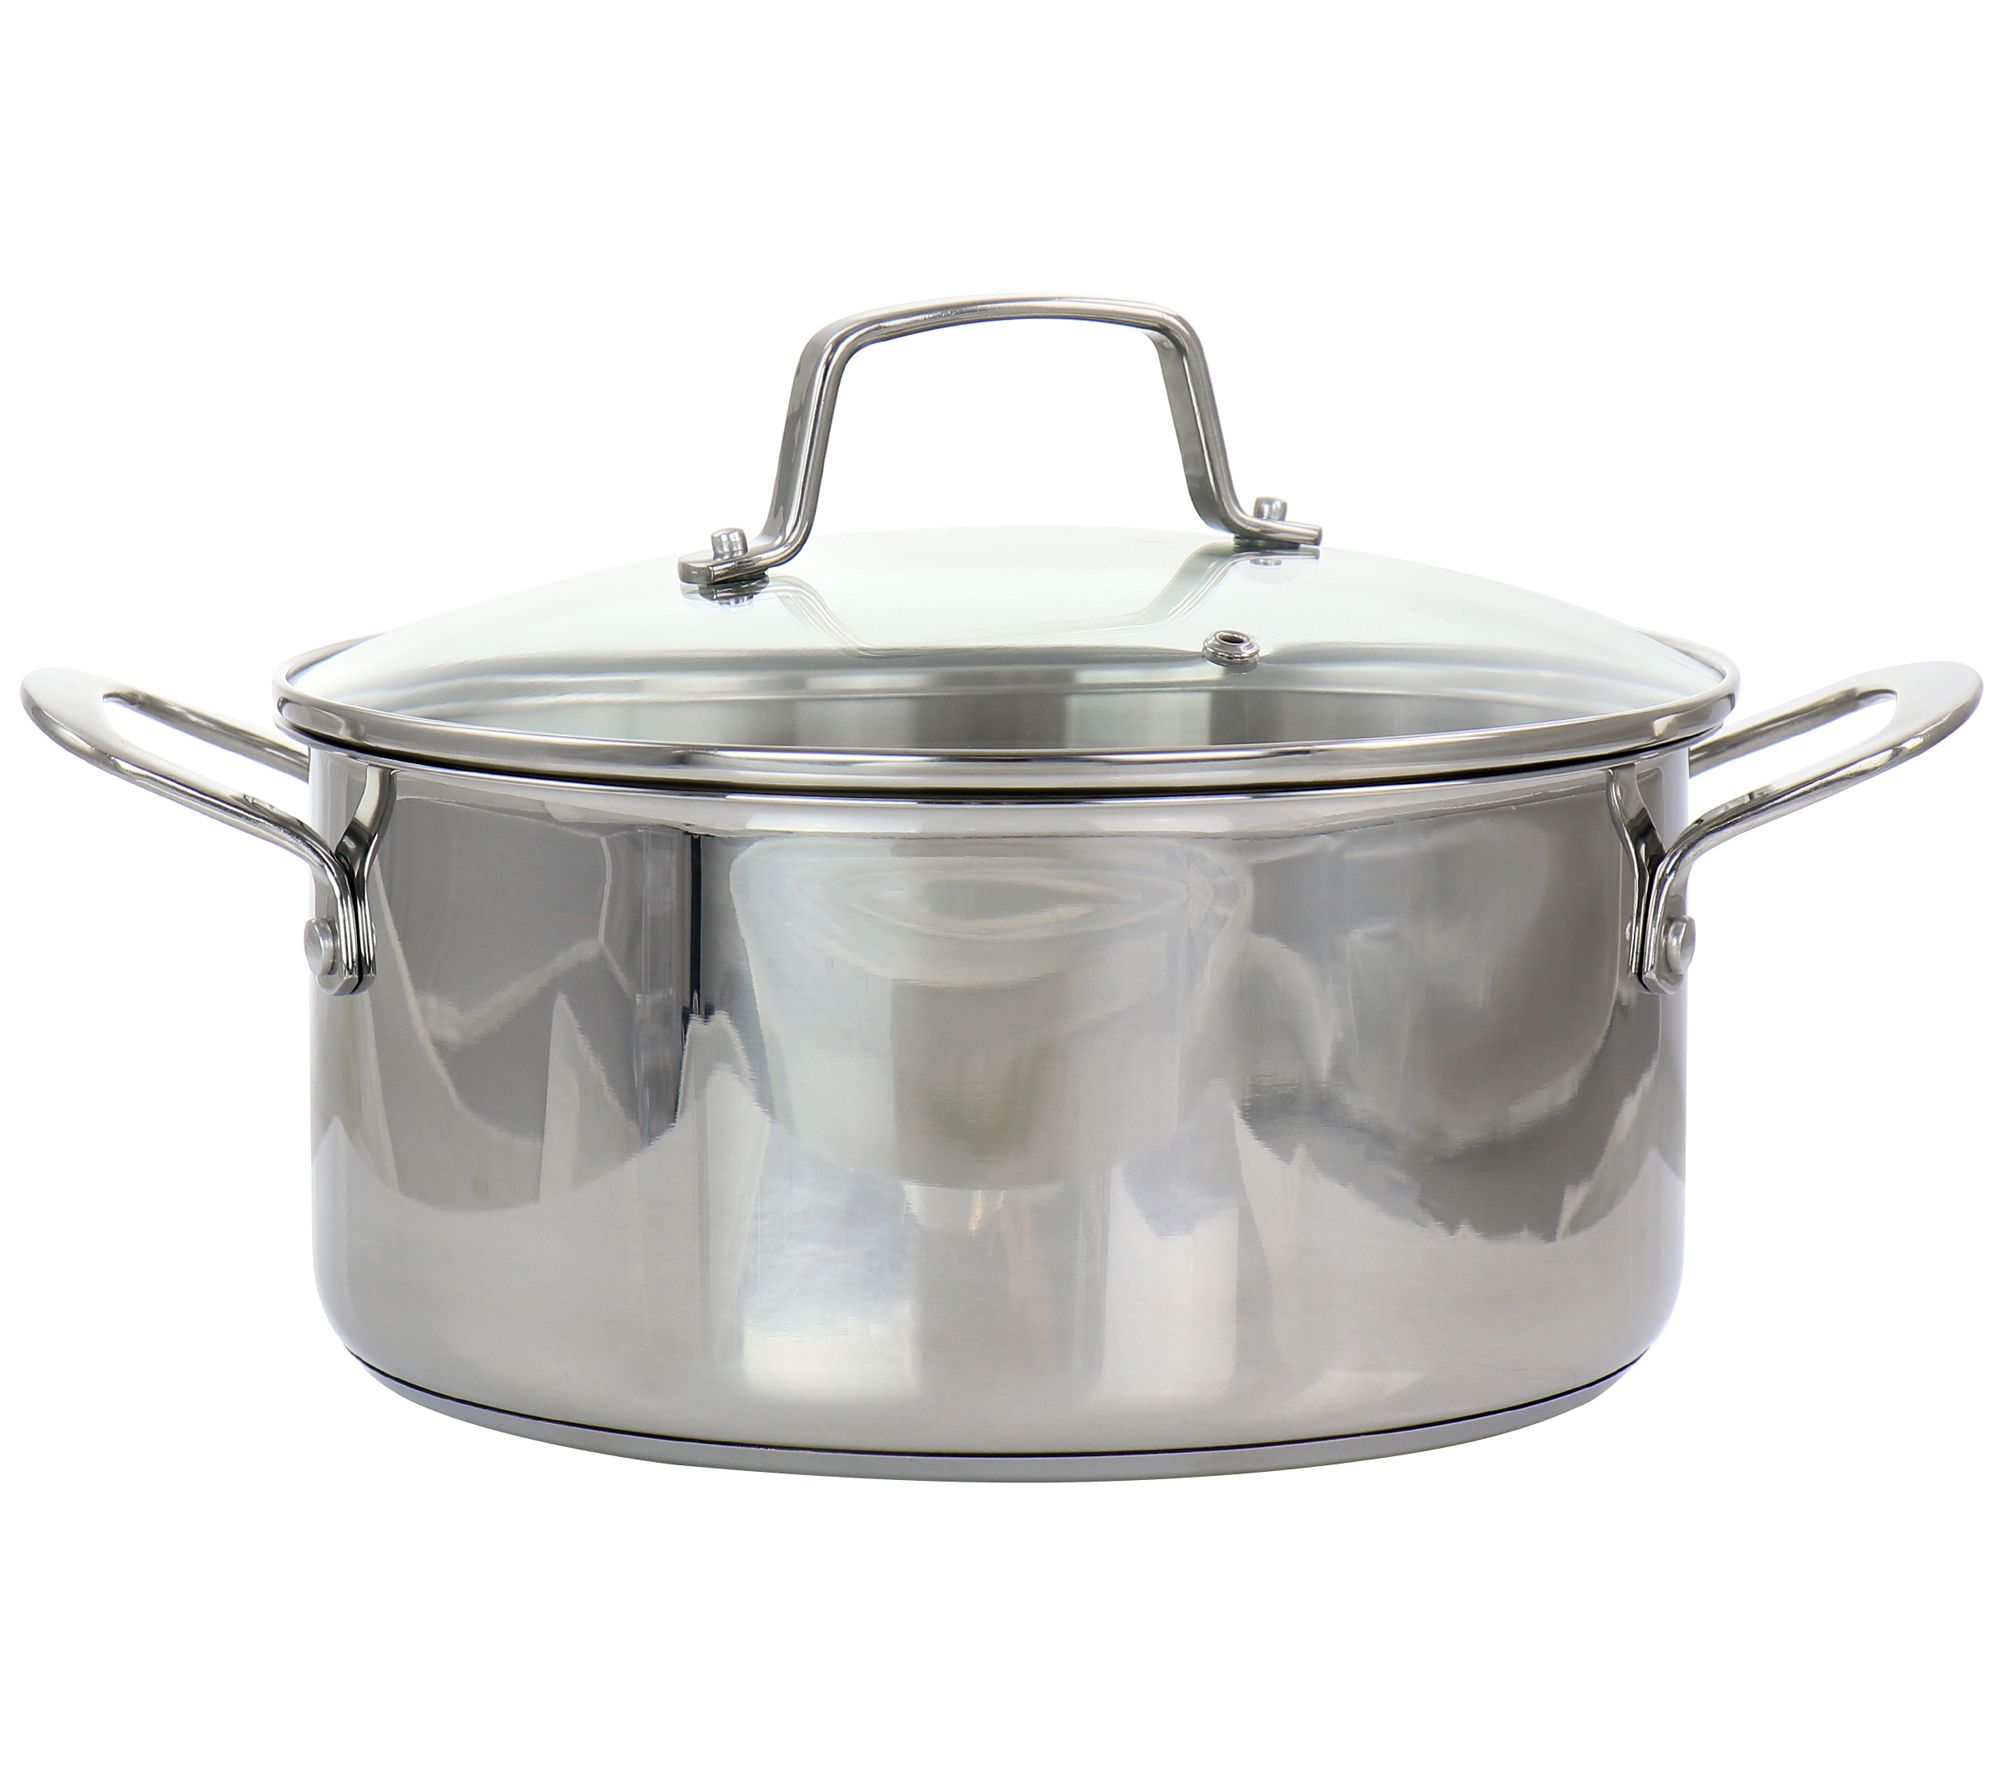 Oster Ashford 6 qt. Round Aluminum Nonstick Dutch Oven in Black with Glass  Lid 985105841M - The Home Depot